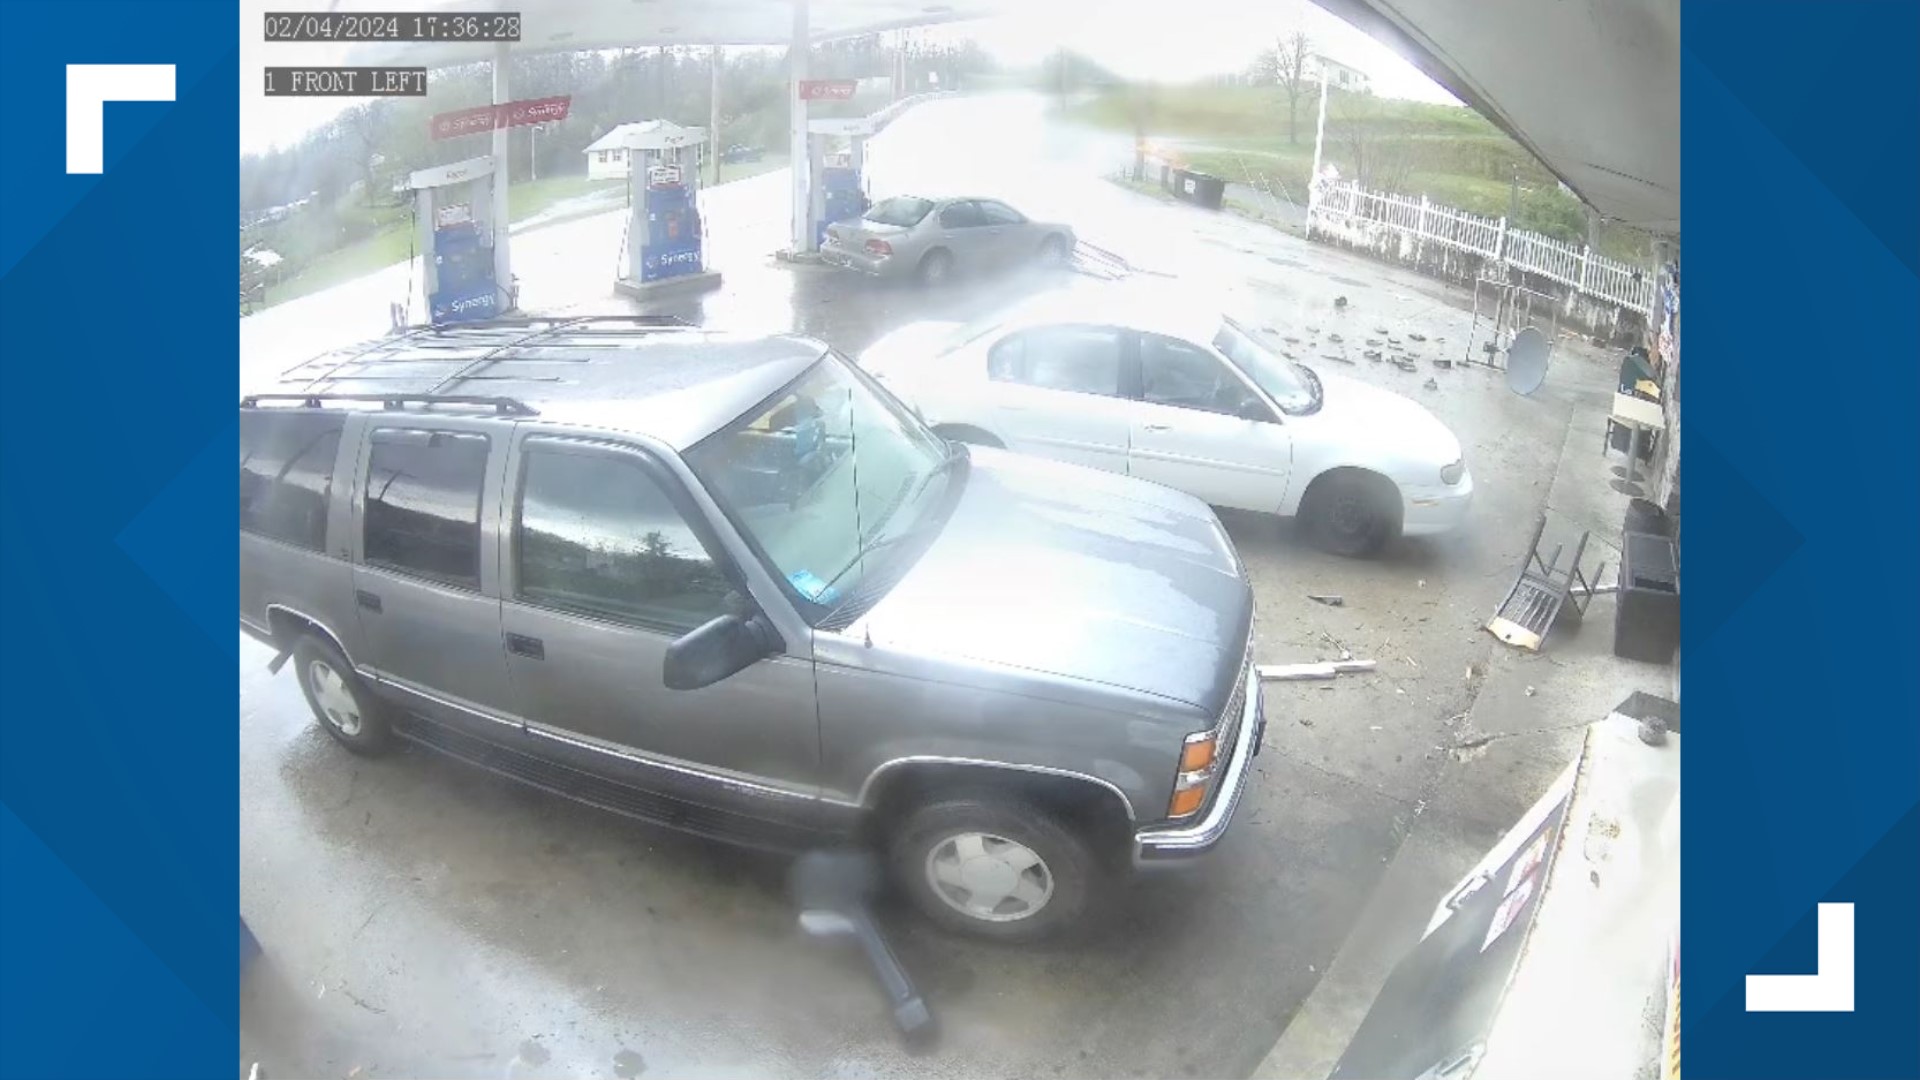 A camera caught the moment a tornado hit the Exxon gas station in Sunbright. Credit: Nirmal Patel